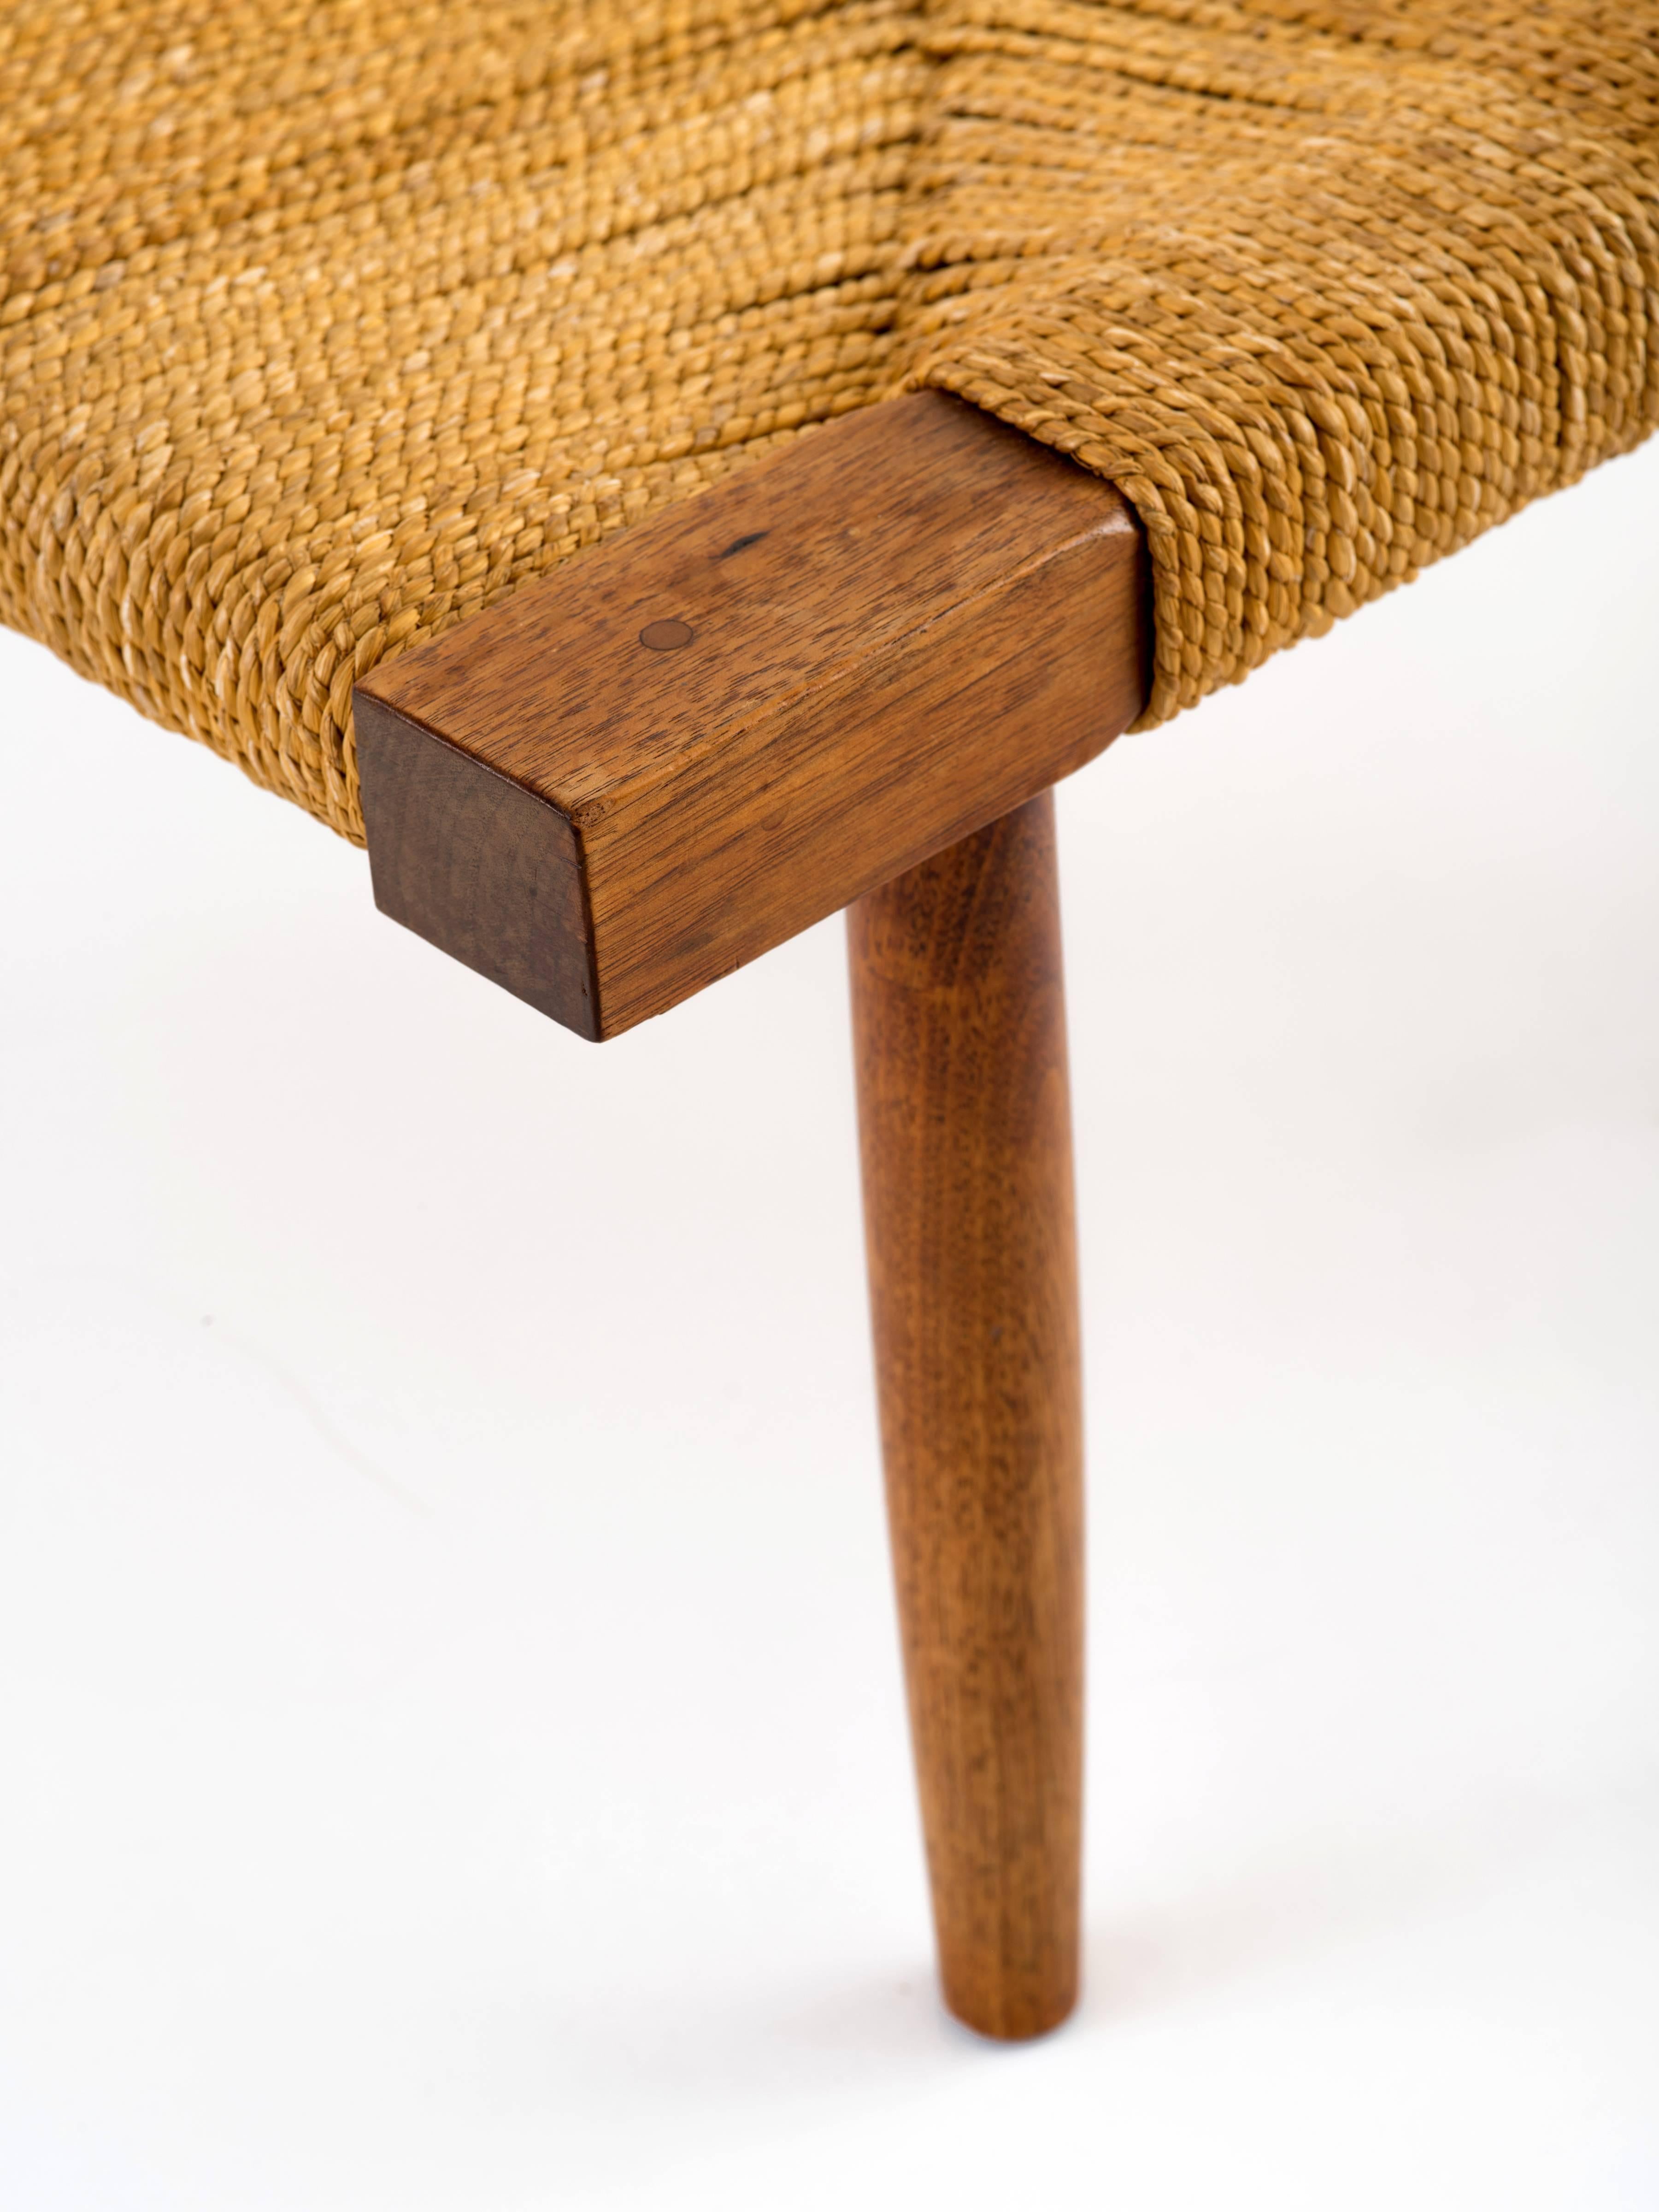 Mid-Century Modern George Nakashima Fitch Stool / Ottoman in Walnut with Grass Cord Seat